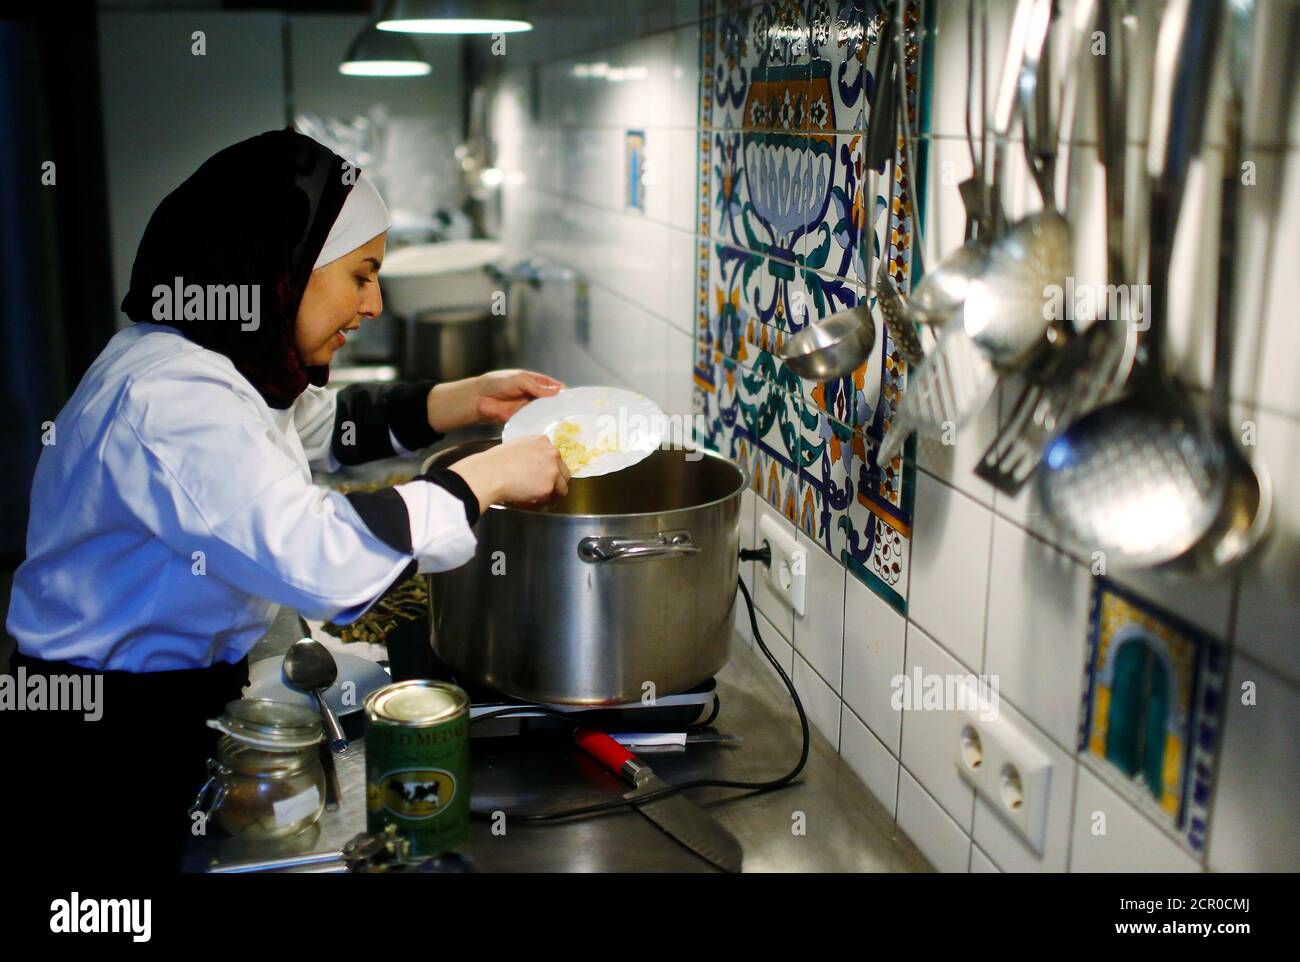 Syrian migrant Malakeh Jazmati cooks in a kitchen of Cafe in Berlin, Germany January 23, 2018. REUTERS/Hannibal Hanschke Stock Photo